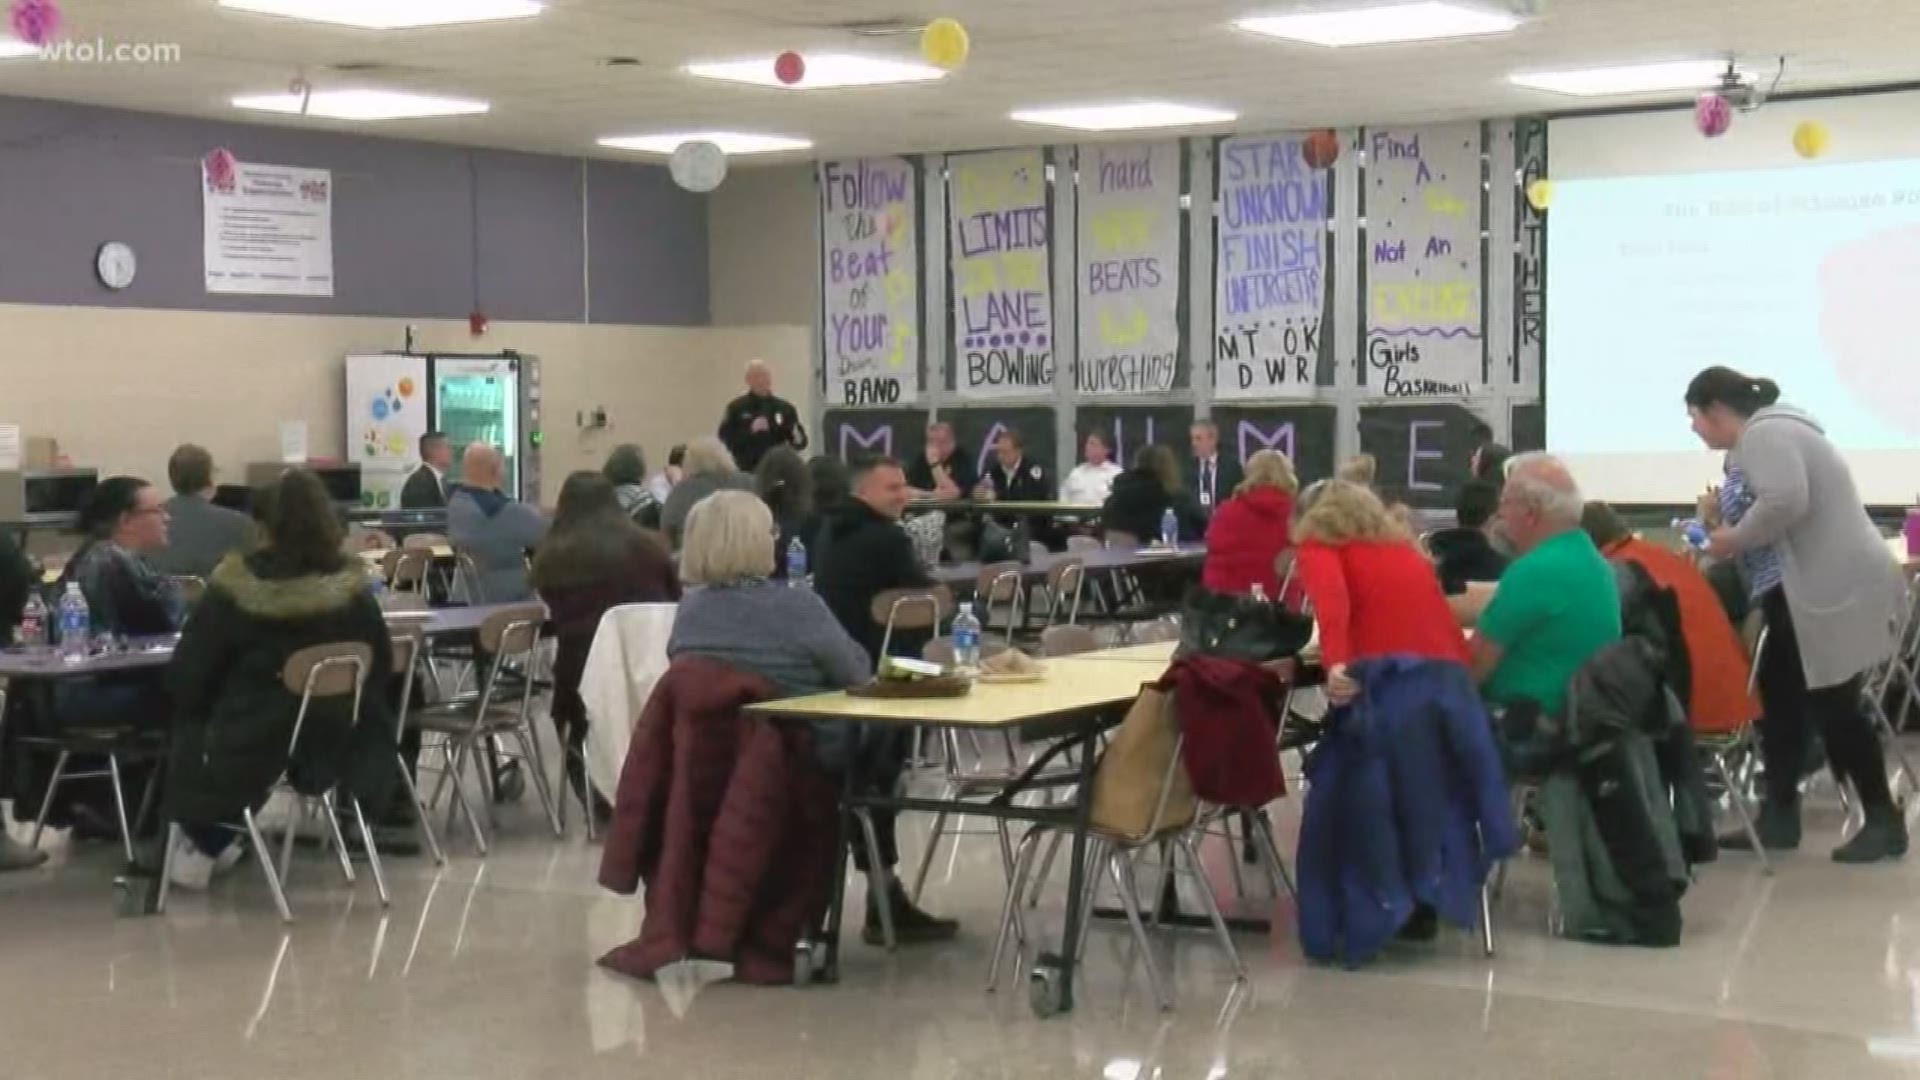 Maumee City Schools and first responders join forces to keep students